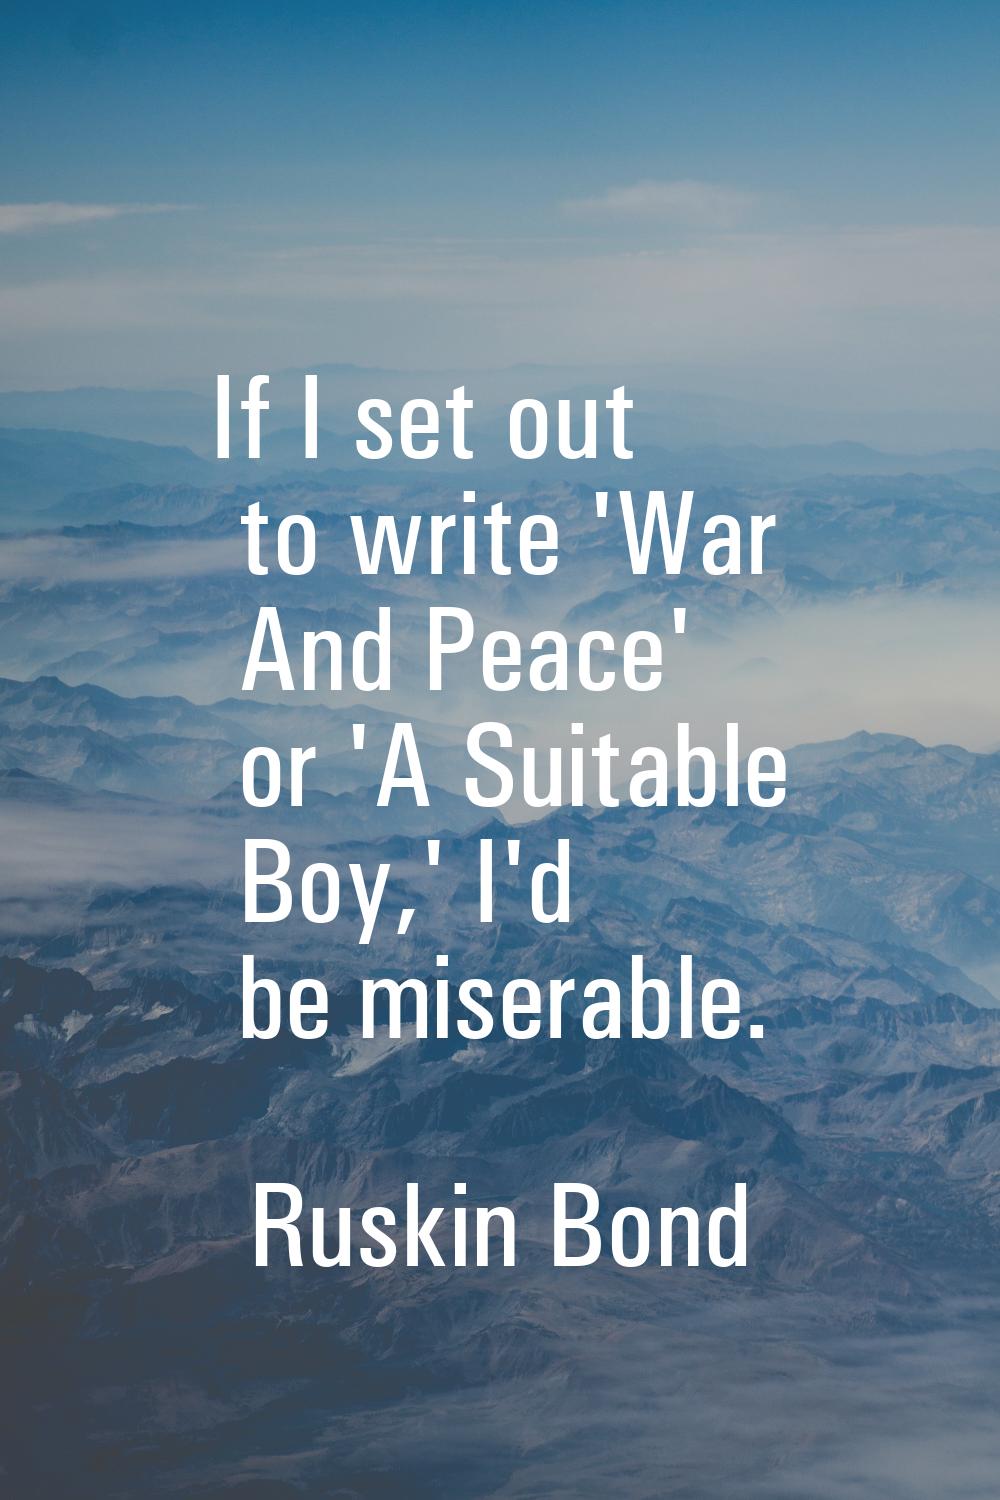 If I set out to write 'War And Peace' or 'A Suitable Boy,' I'd be miserable.